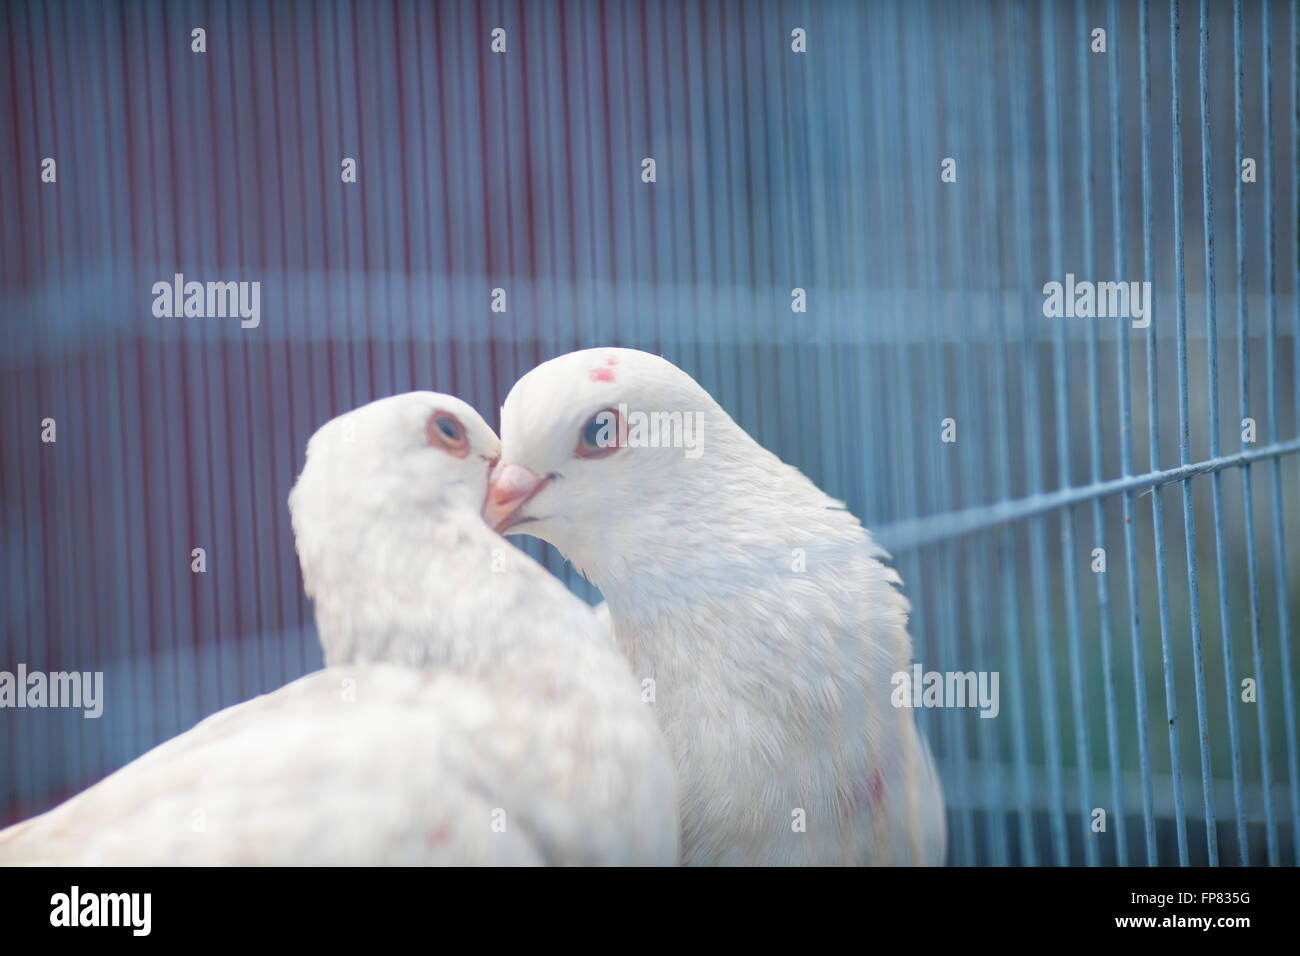 Close-Up Of White Dove Kissing In Cage Stock Photo